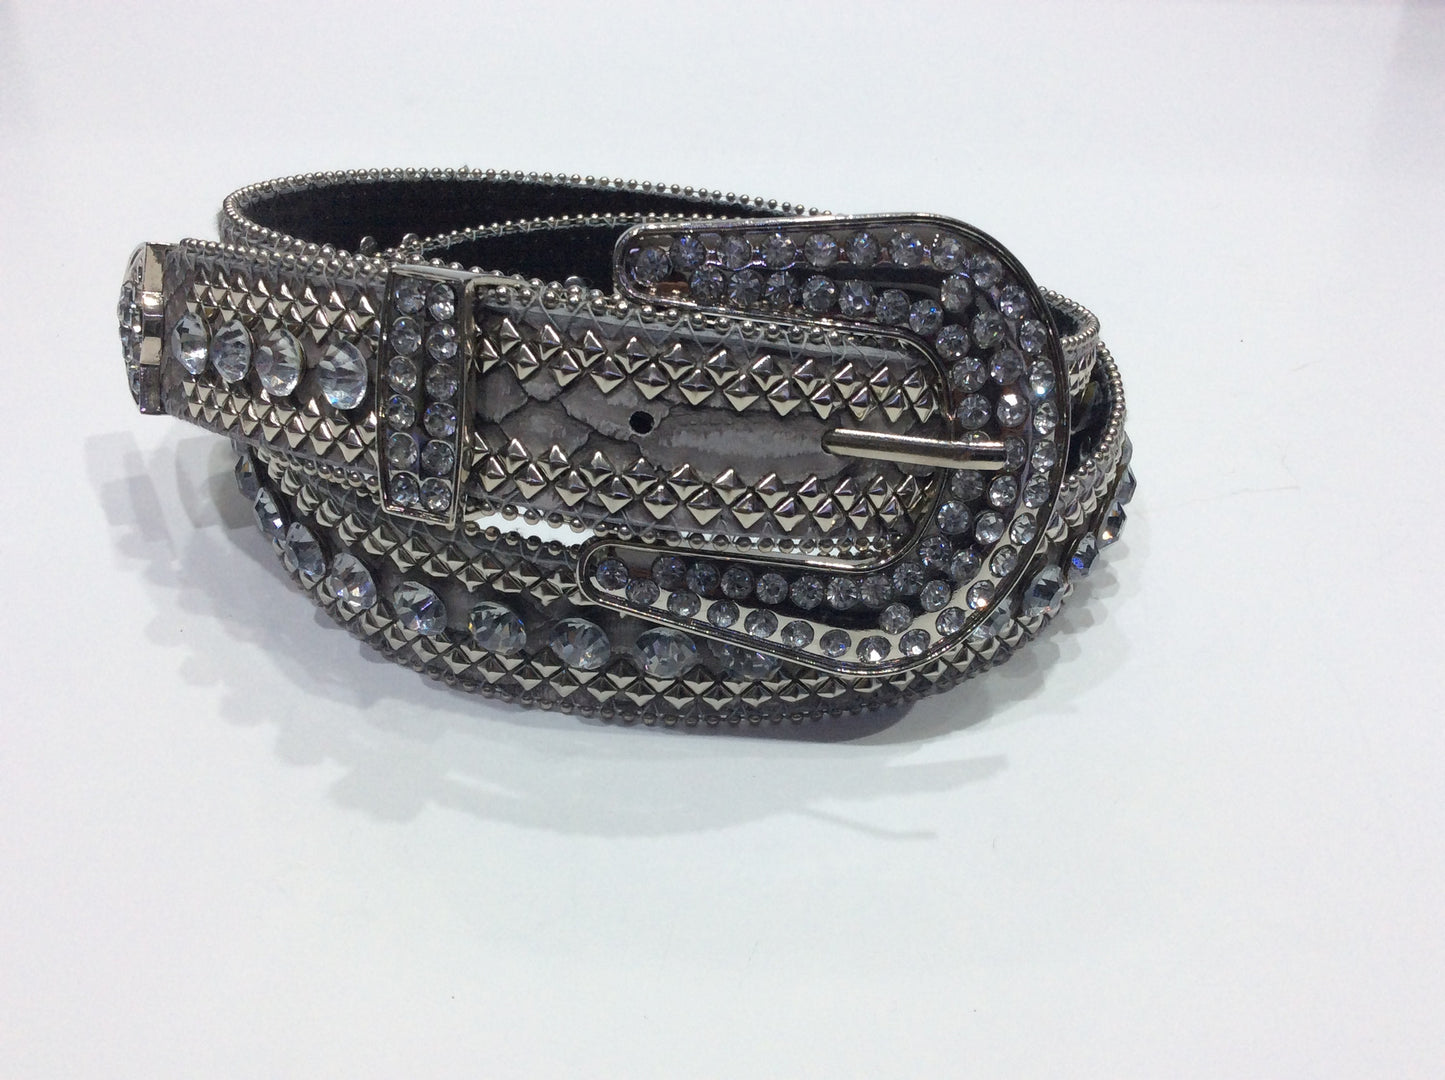 Belts-Wide Silver Leather with Silver Bead, Stud and Crystal Embellishment